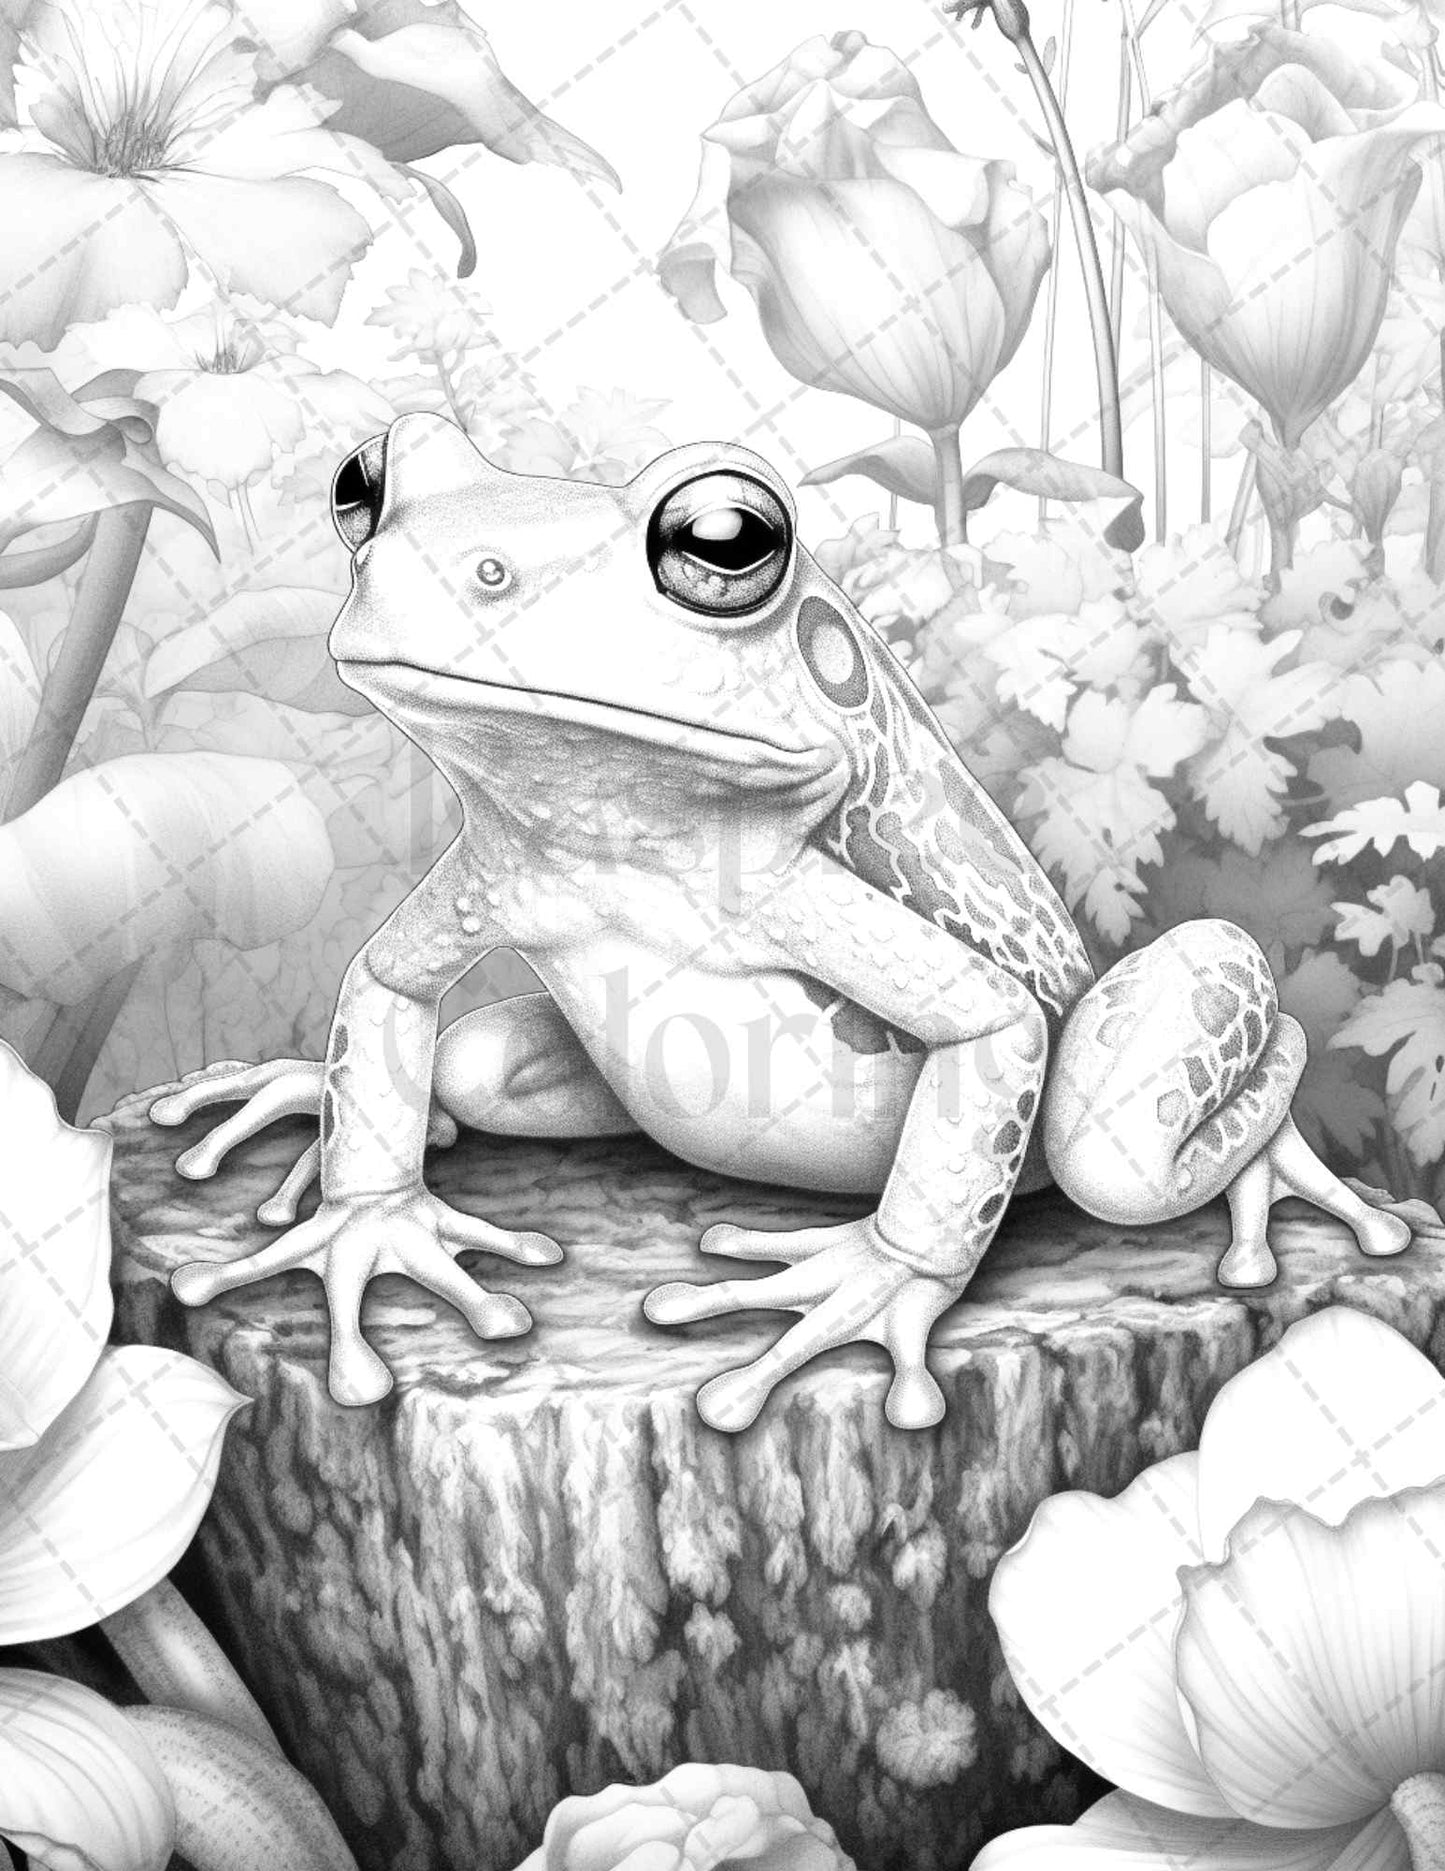 Cottagecore Frog Grayscale Coloring Pages for Adults, Printable Adult Coloring Sheets with Frog Illustrations, Black and White Grayscale Drawings for Coloring, Relaxing Nature-inspired Coloring Activities, Whimsical Frog-themed Coloring Book for Adults, Detailed Printable Coloring Images for Stress Relief, Cottagecore Aesthetic Coloring Decor with Frogs, Artistic Mindfulness Coloring Prints for Adults